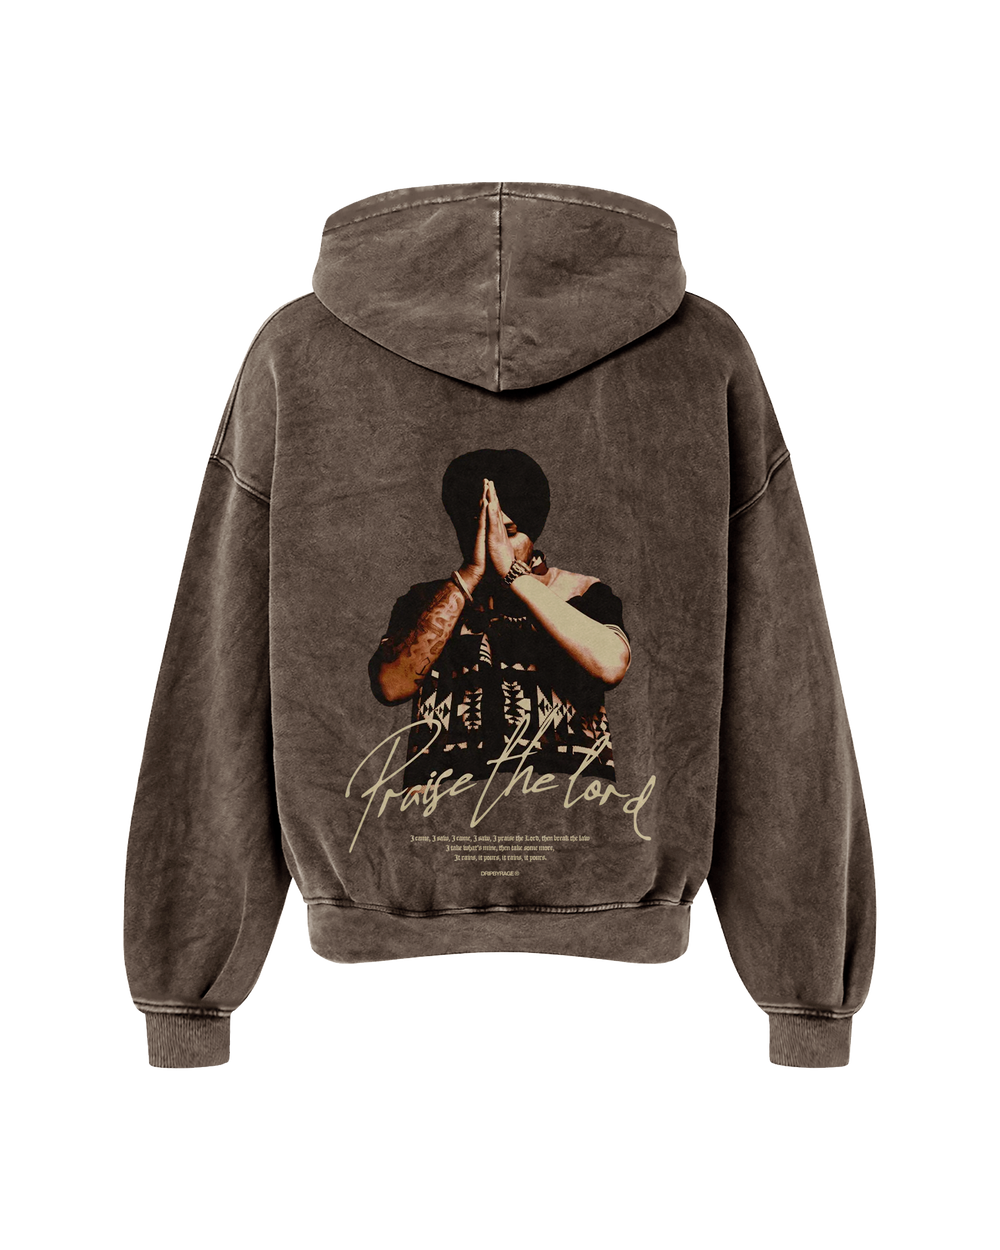 PRAISE THE LORD OVERSIZED WASHED HOODIE BROWN